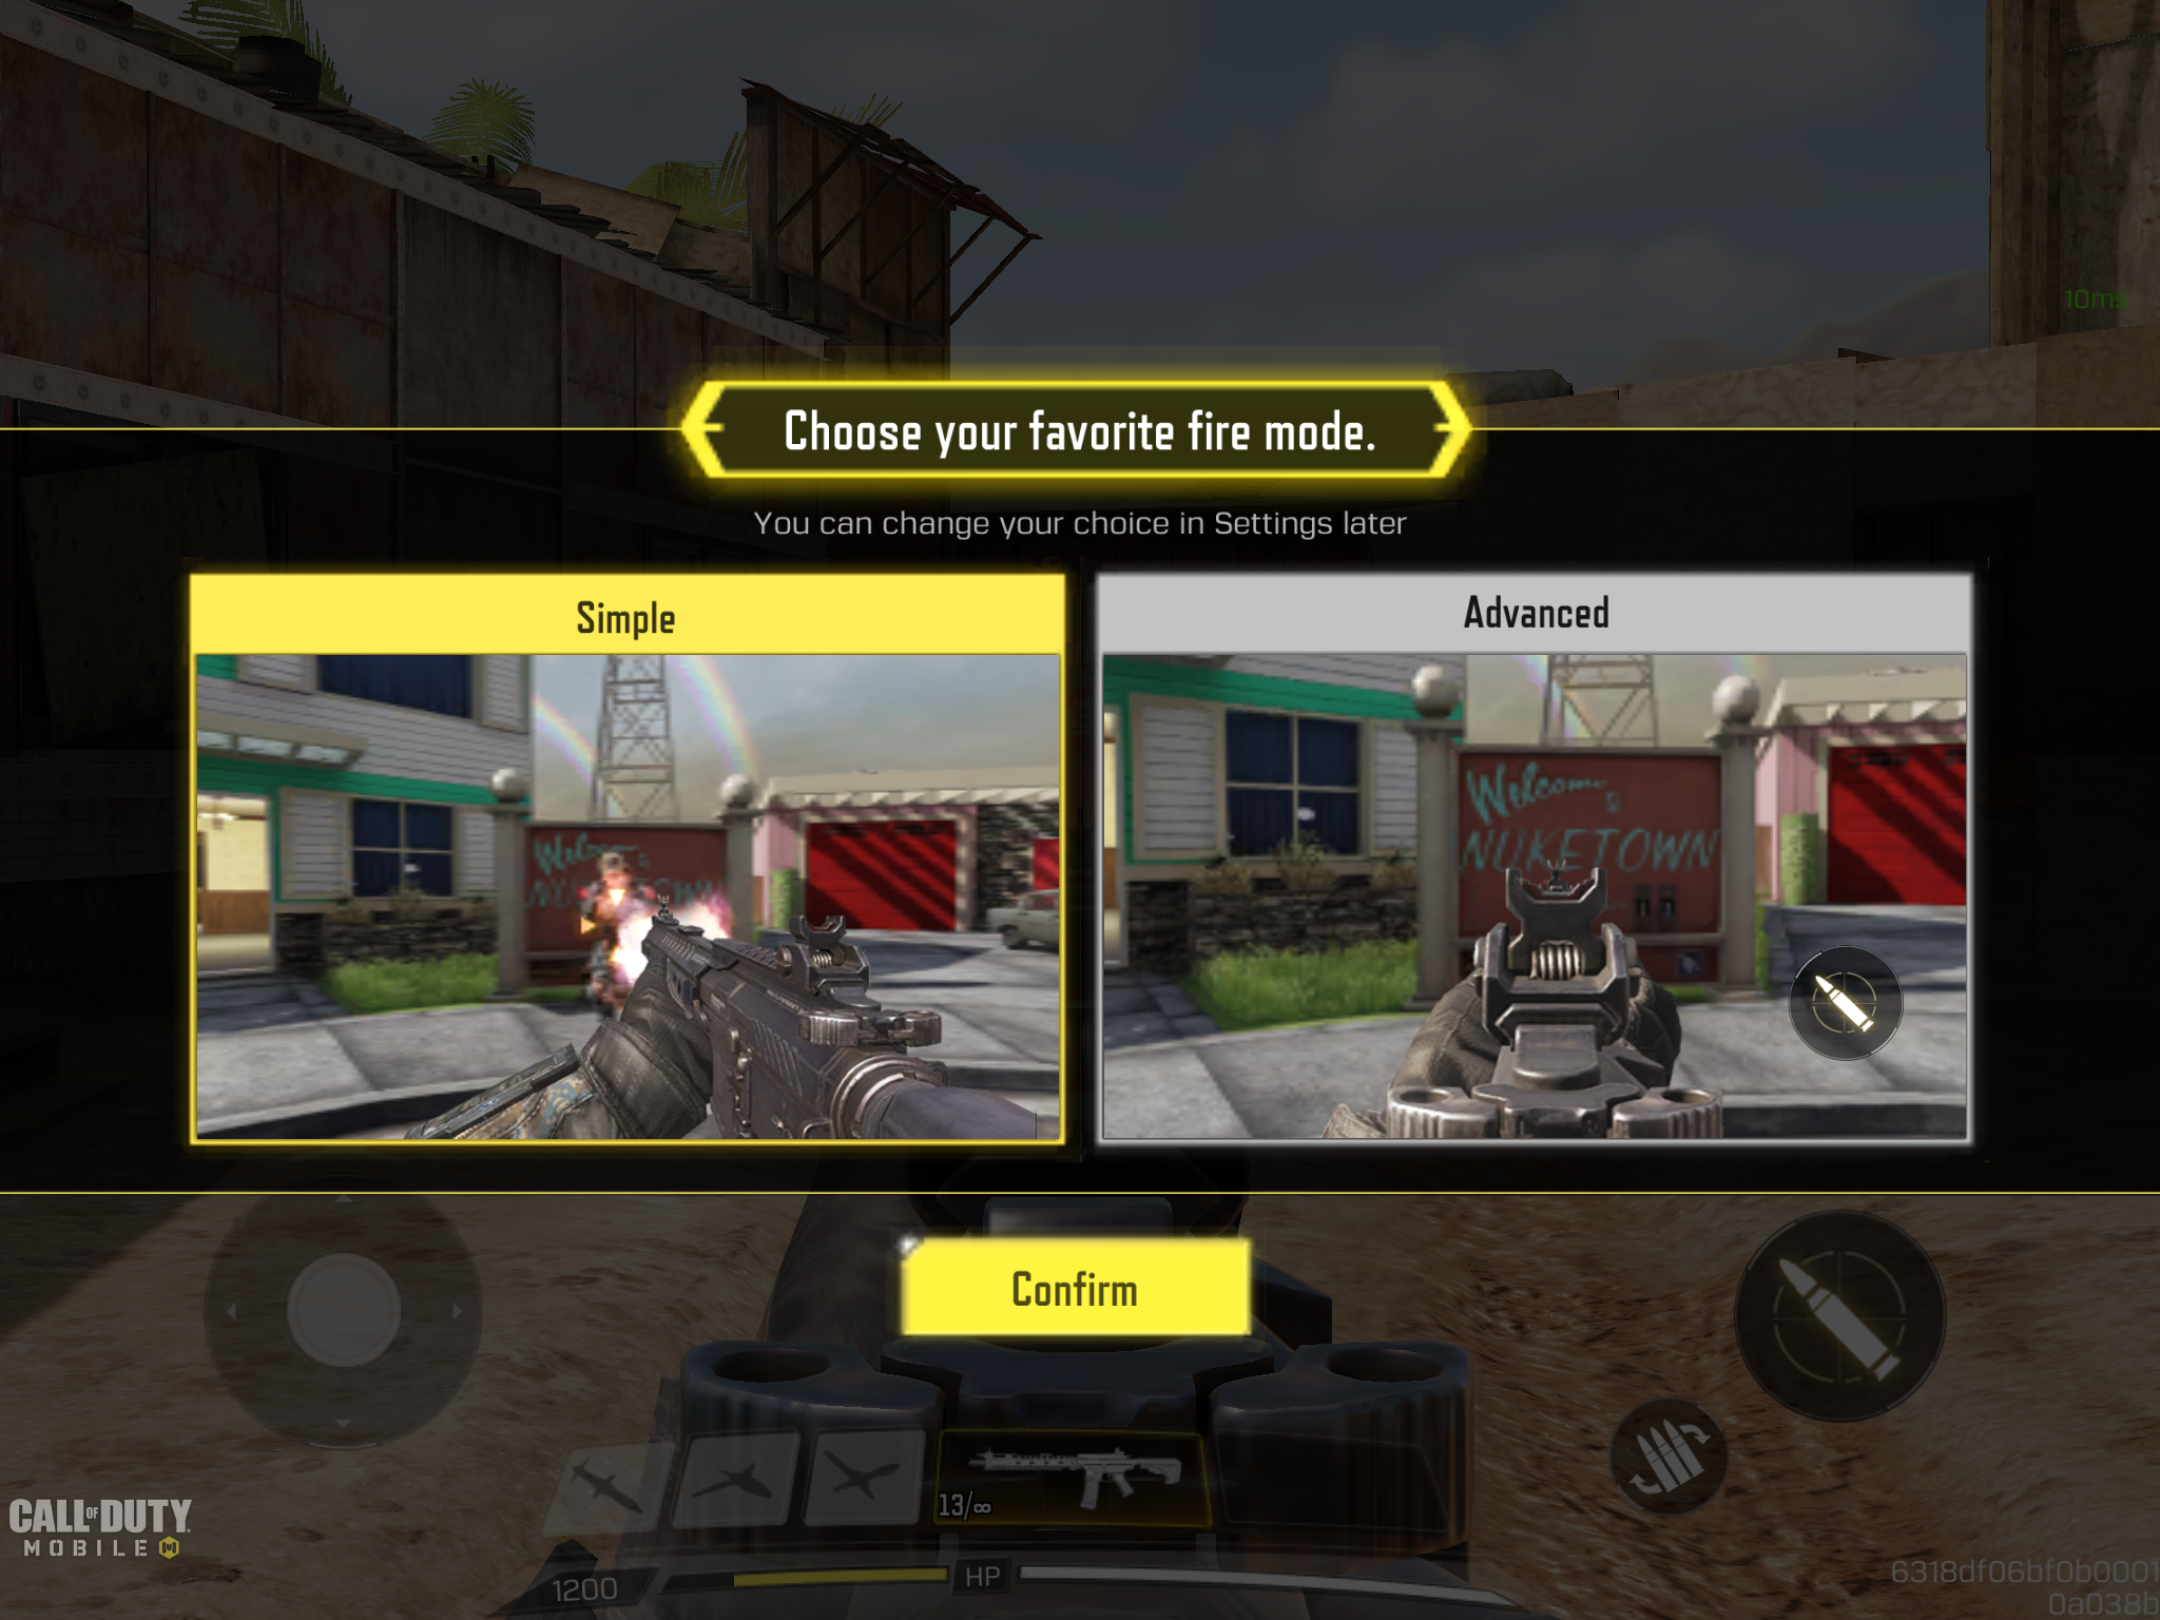 Call of Duty Mobile screen shot of “Choose your favorite fire mode screen” allowing players to choose between simple and advanced. Advanced has an on-screen button shown in the HUD while simple does not.